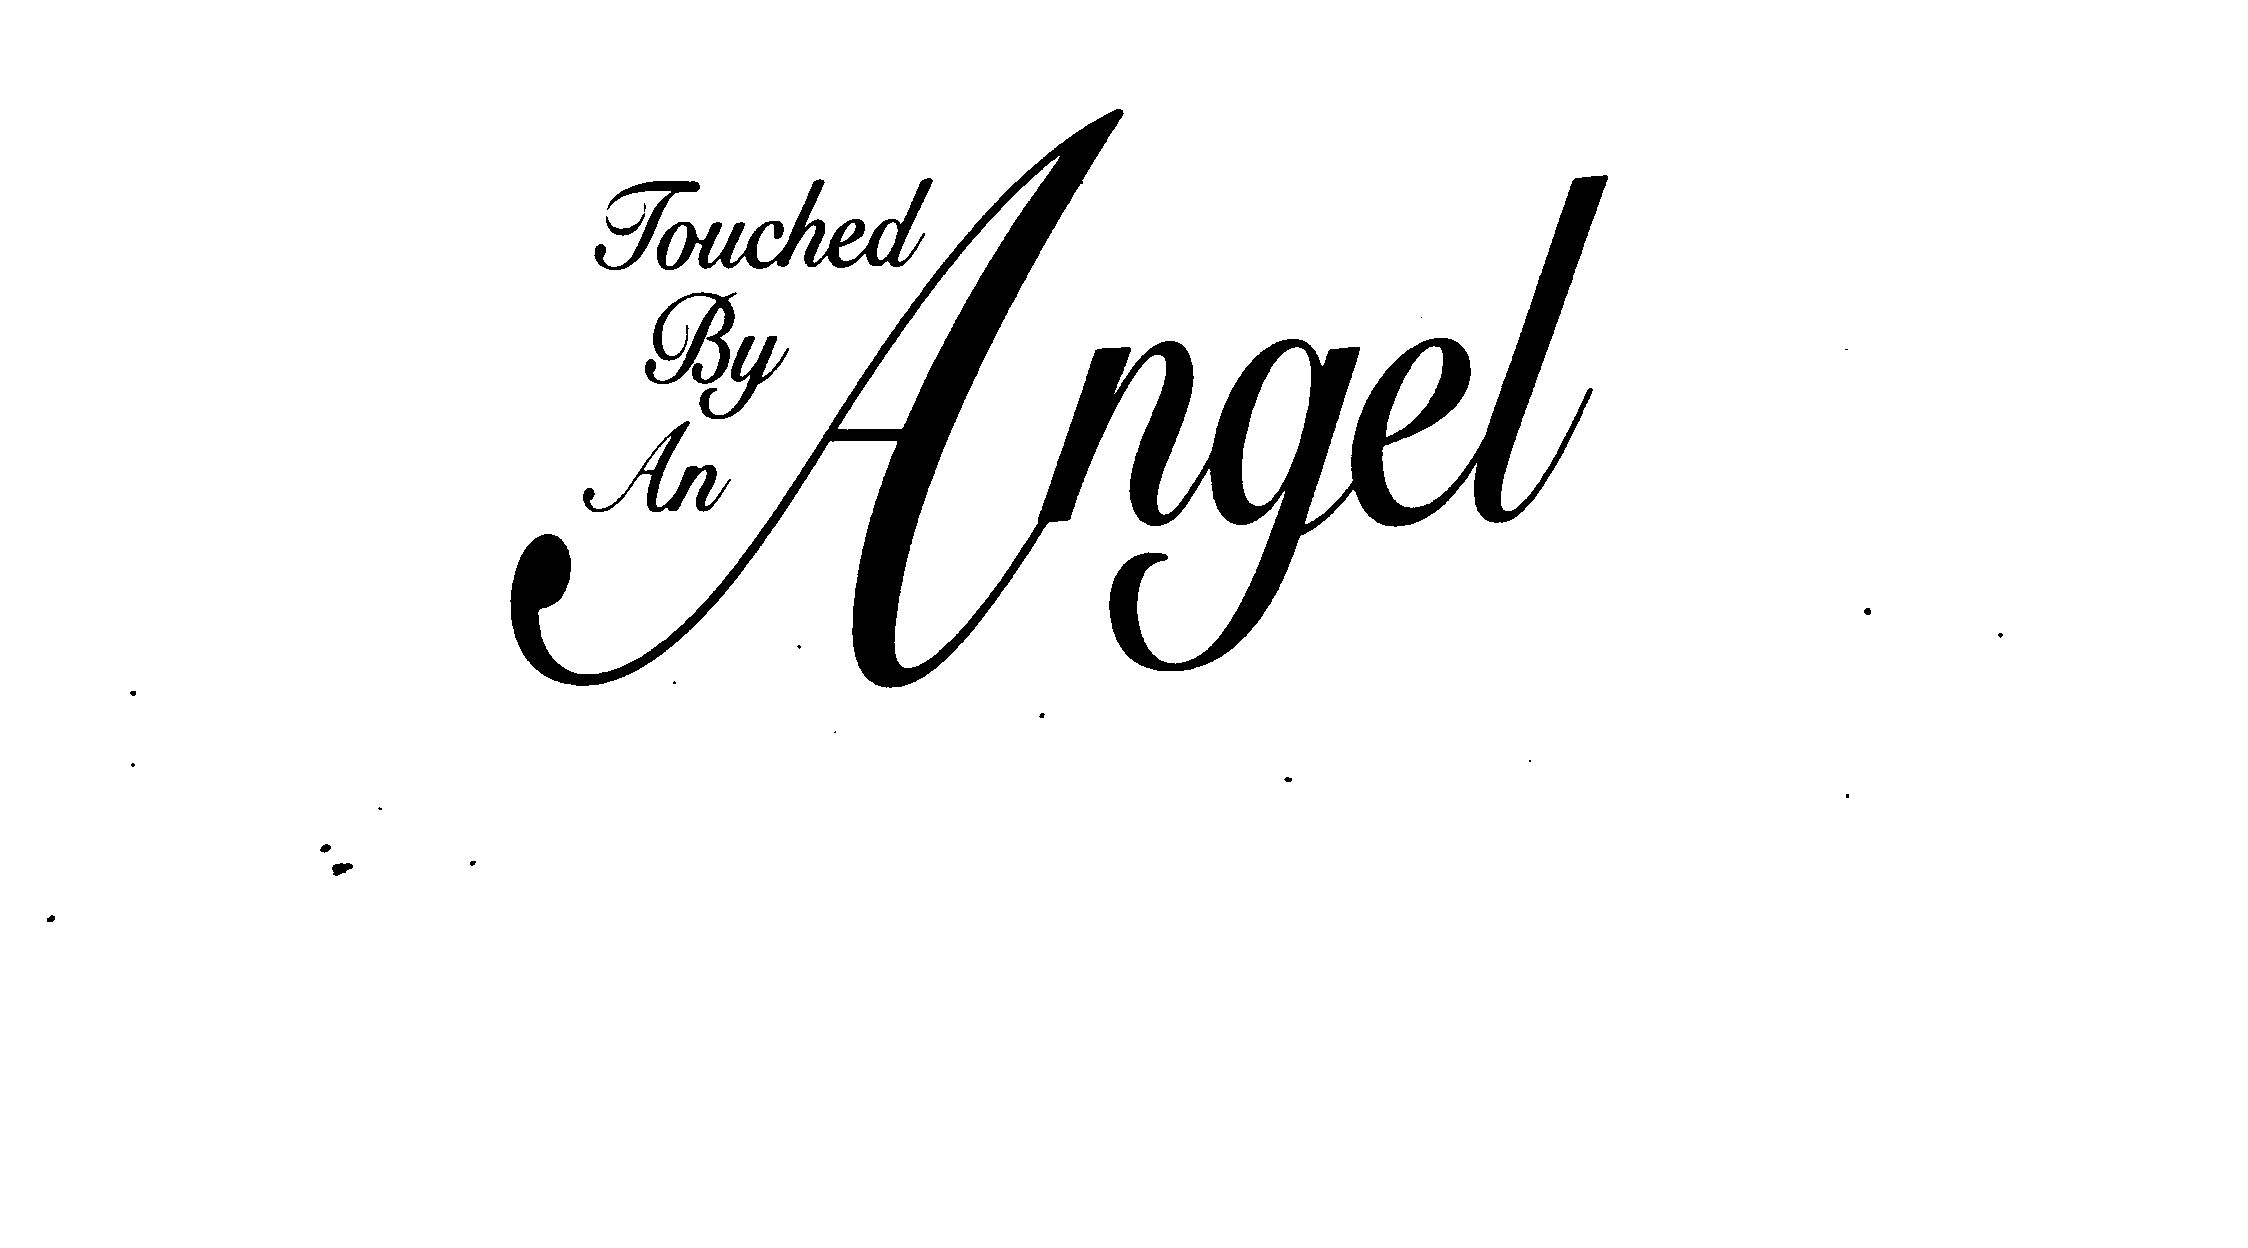  TOUCHED BY AN ANGEL